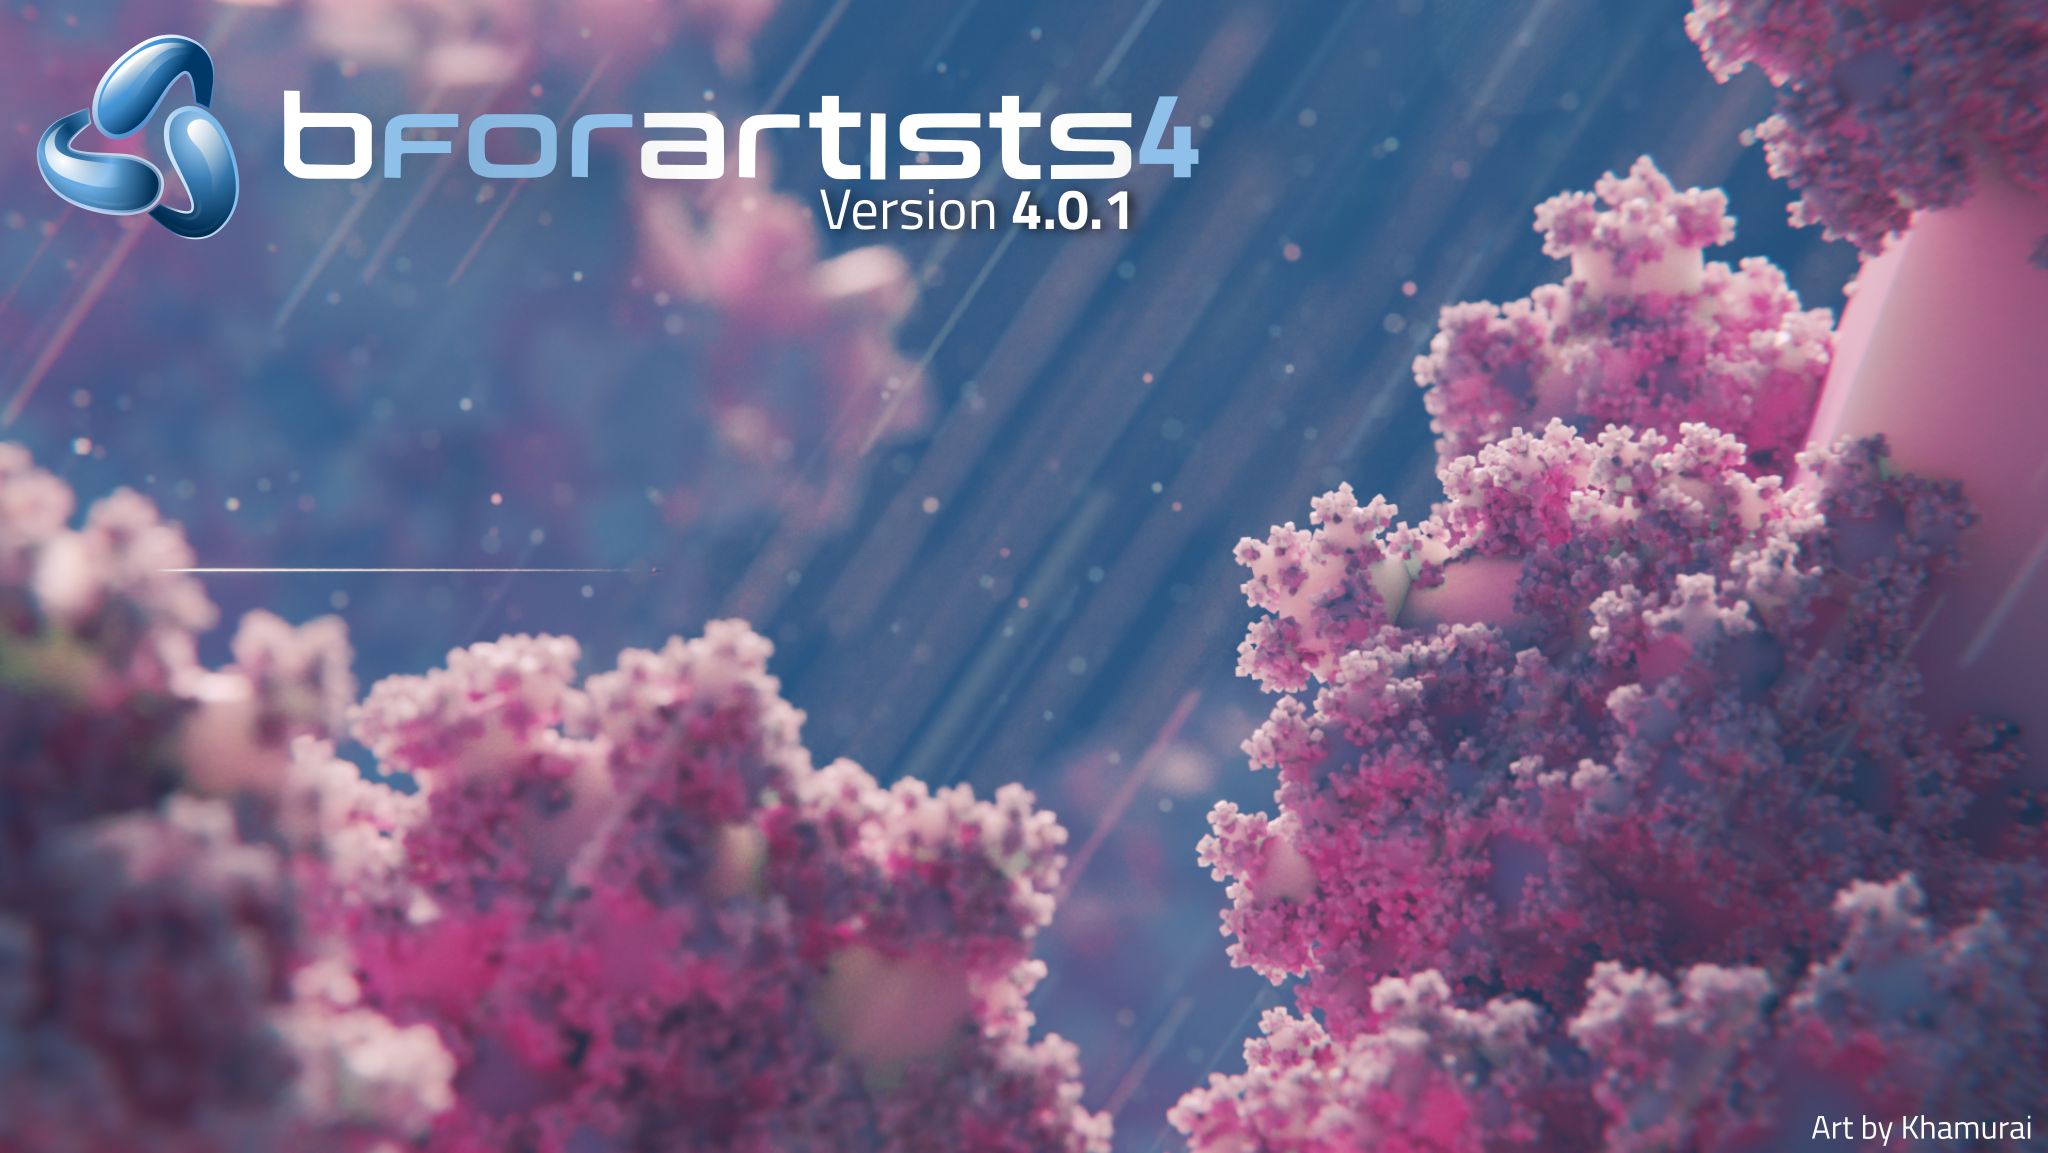 Read more about the article Bforartists 4 – Version 4.0.1 Official Release